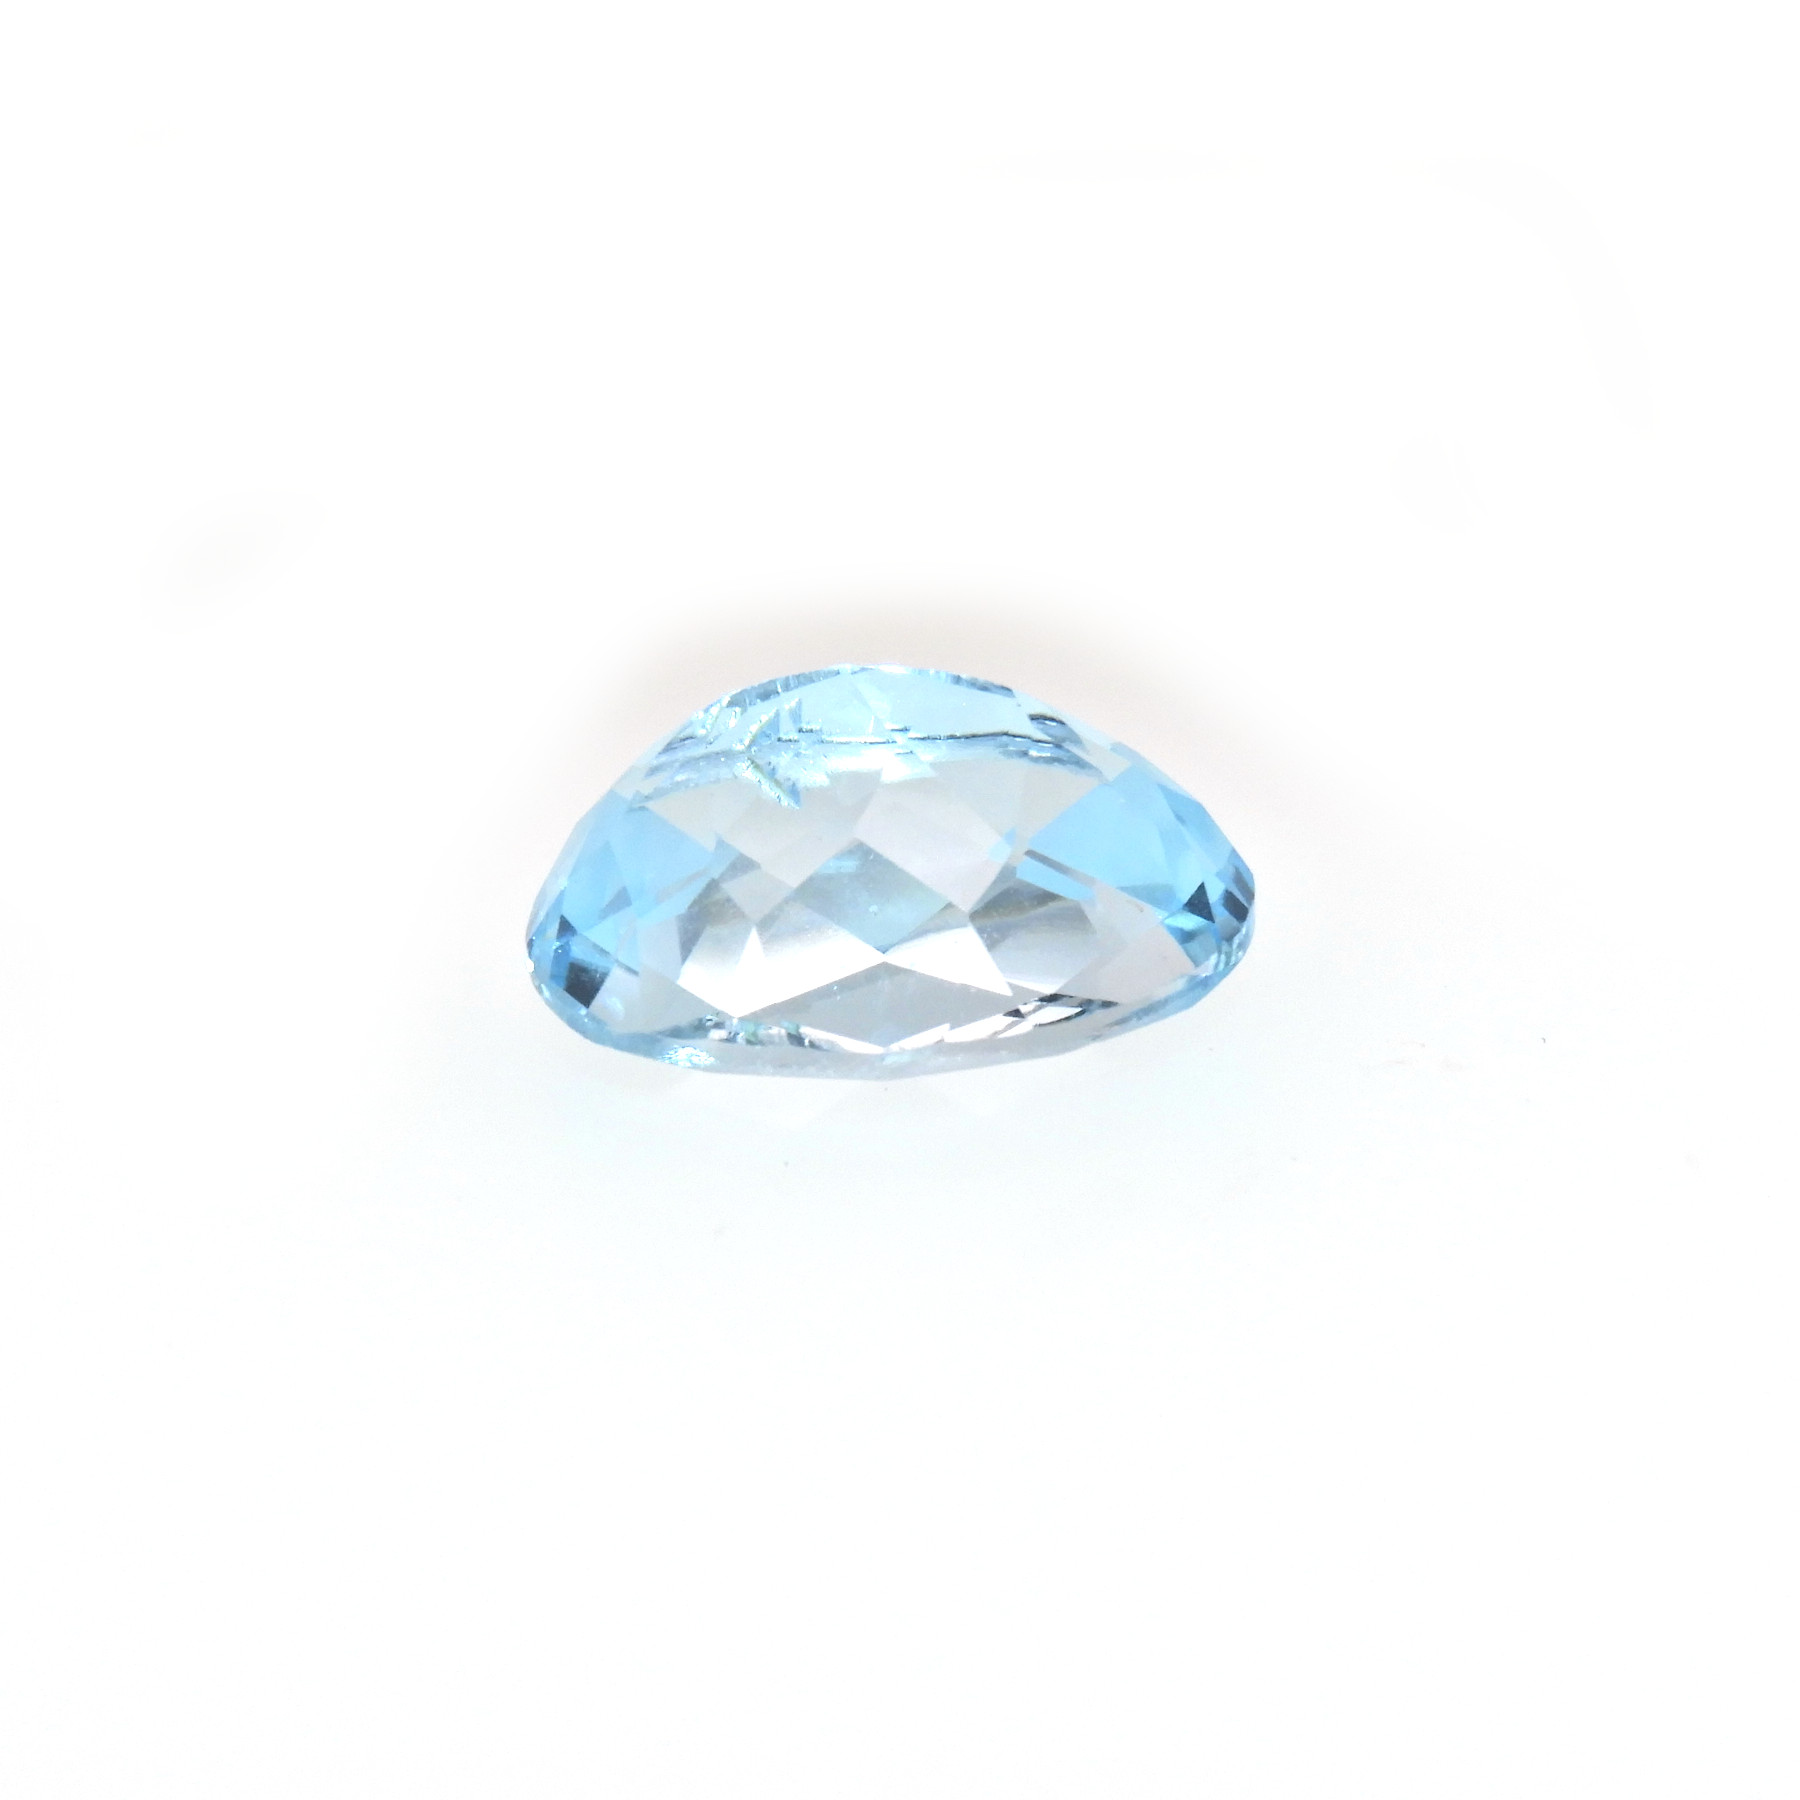 SKY BLUE TOPAZ 6 MM ROUND CUT WITH BUFF TOP 